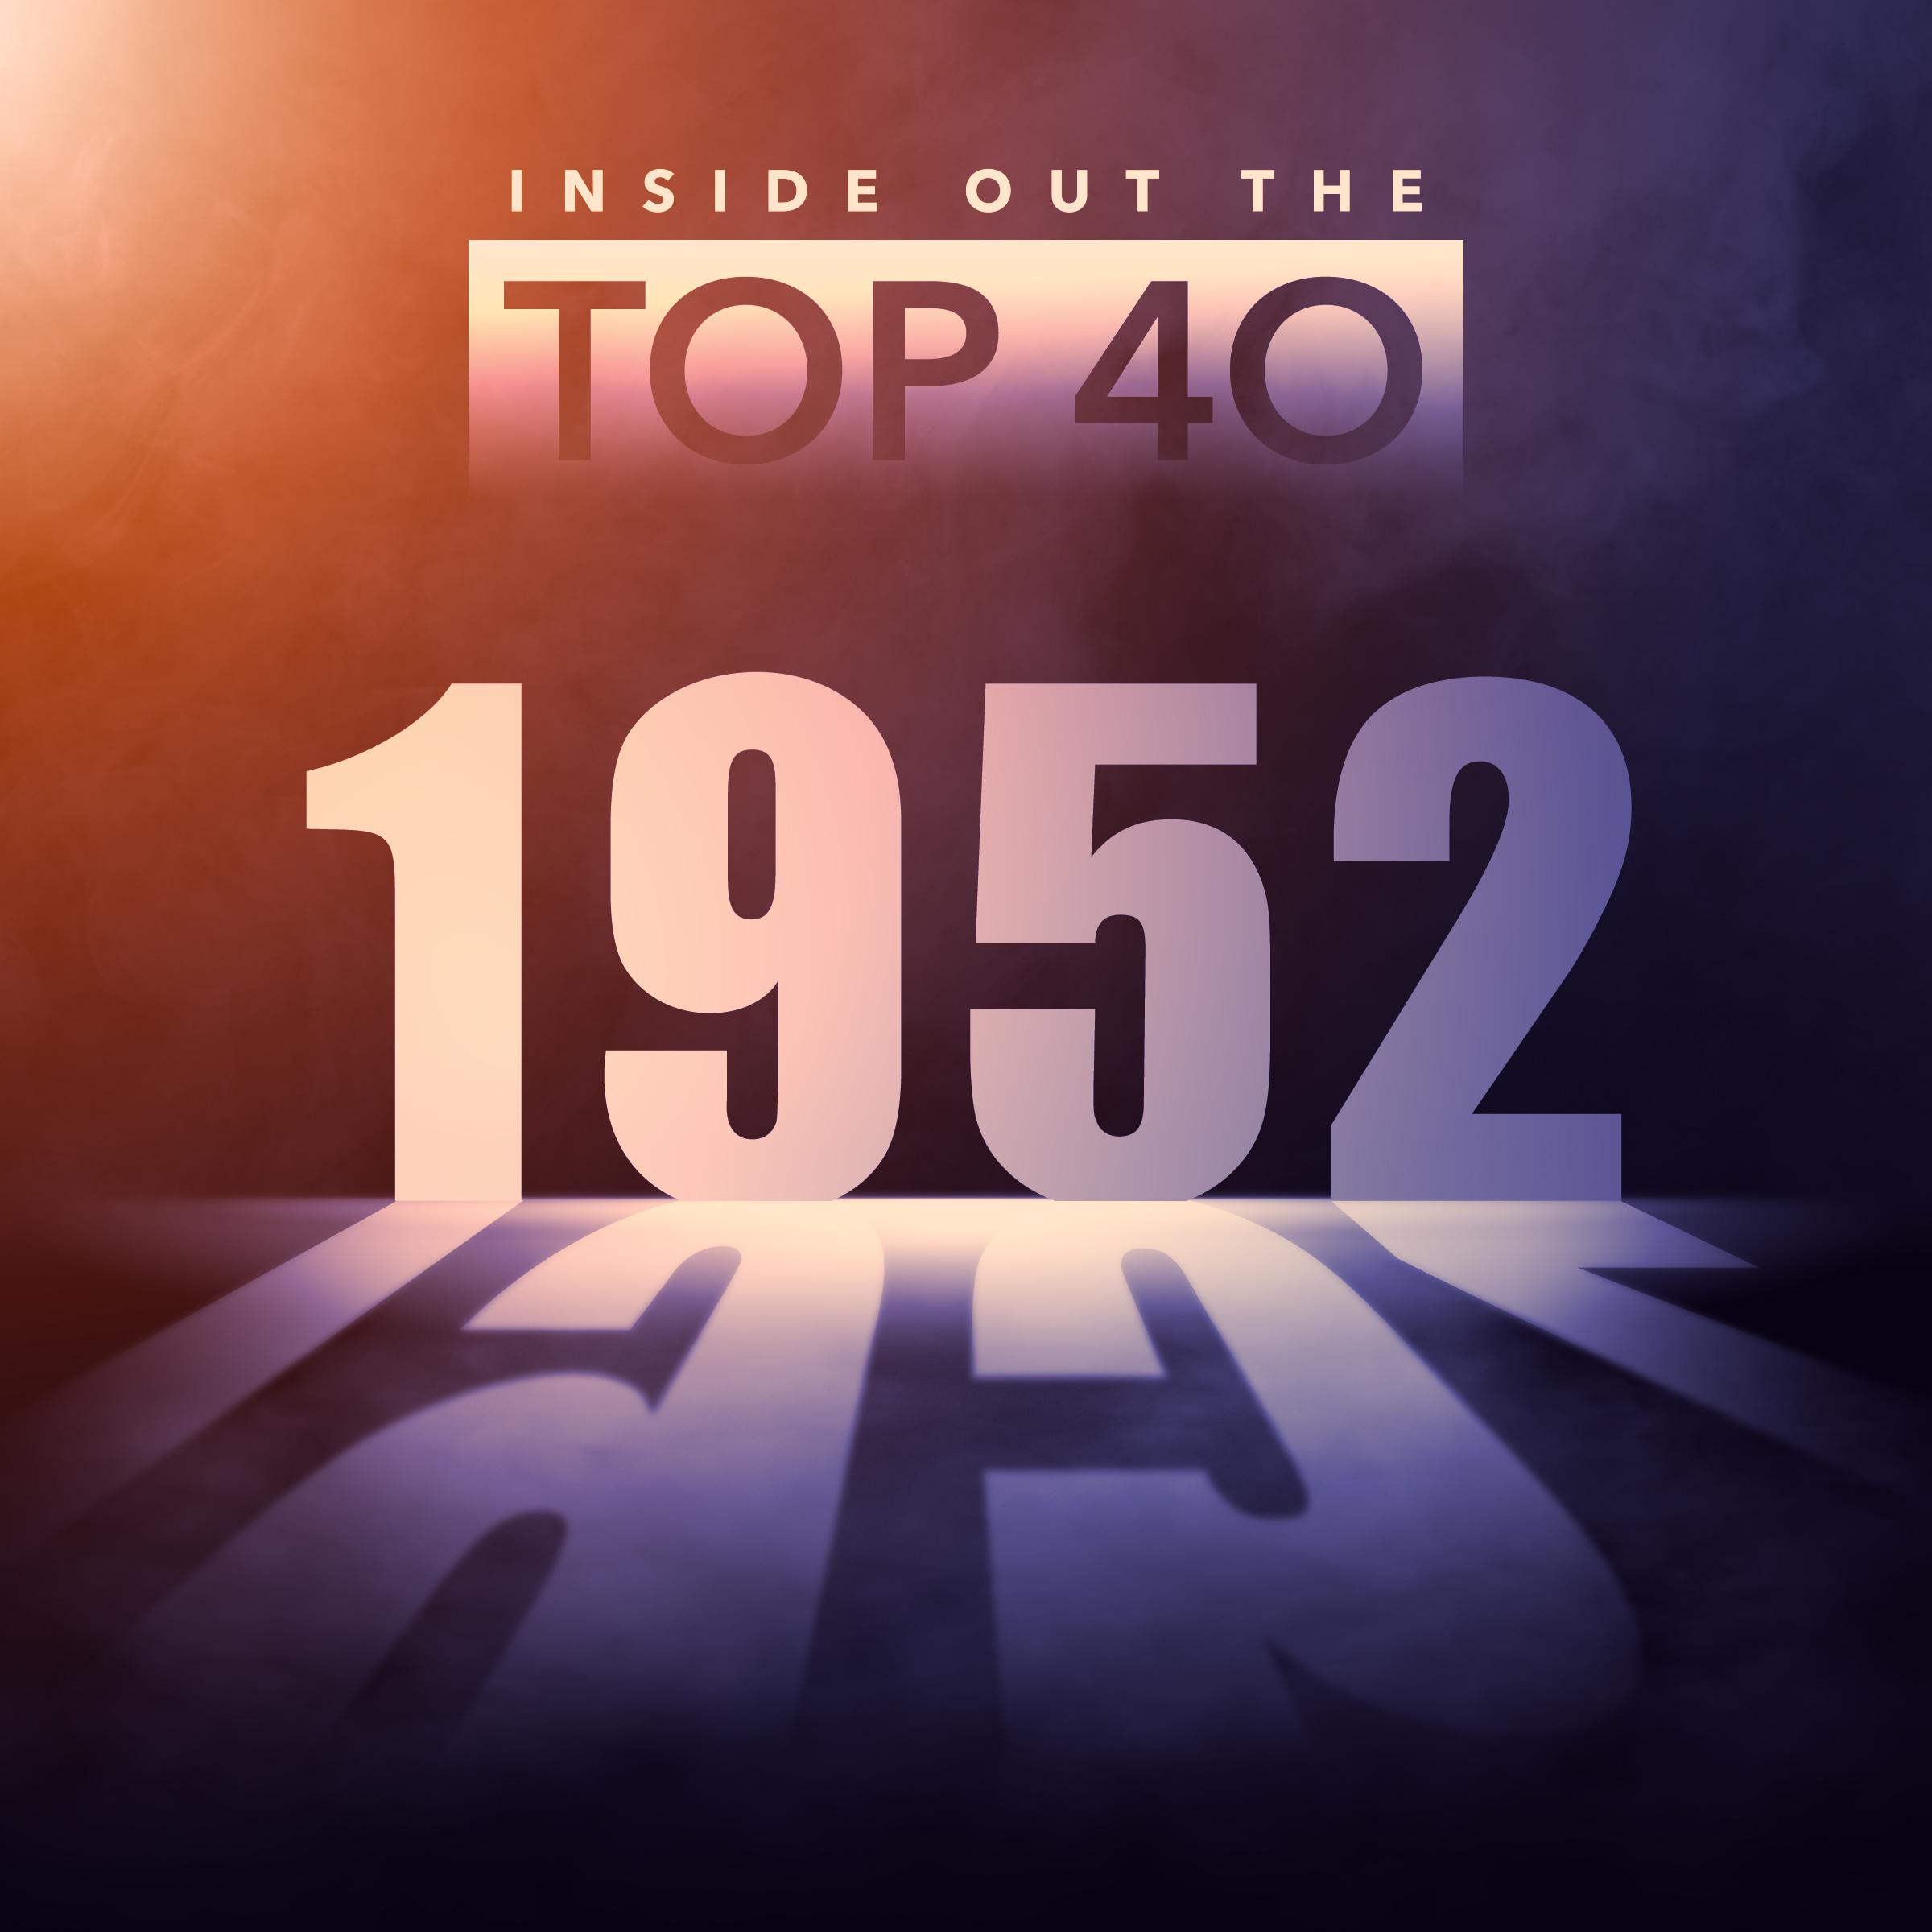 Inside Out the Top 40 - 1952